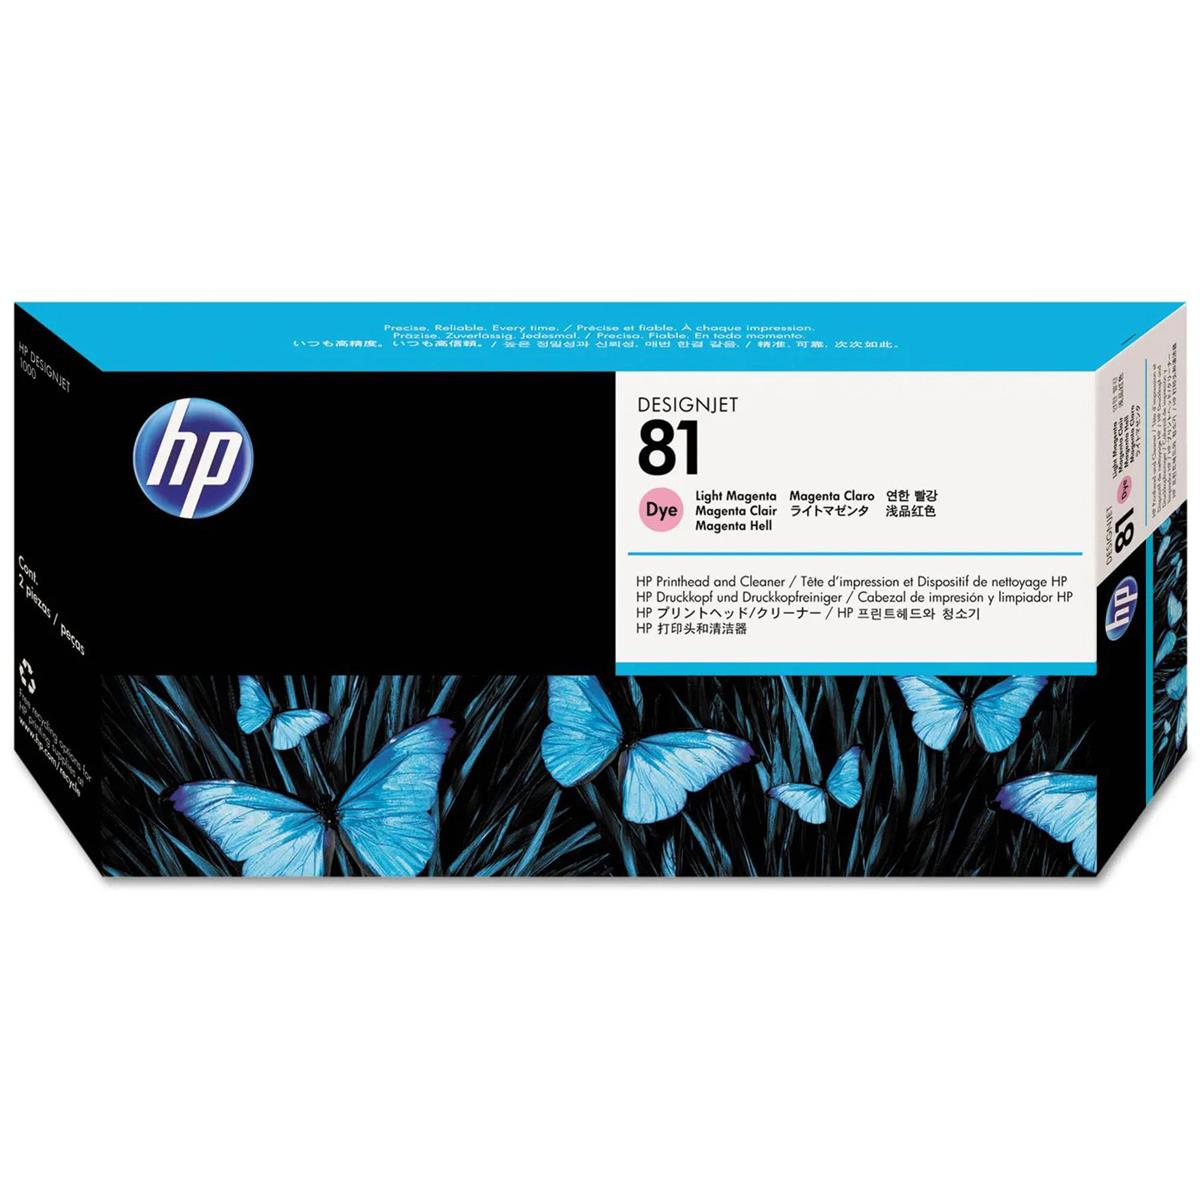 81 Light Magenta Dye Printhead and Cleaner - HP C4955A